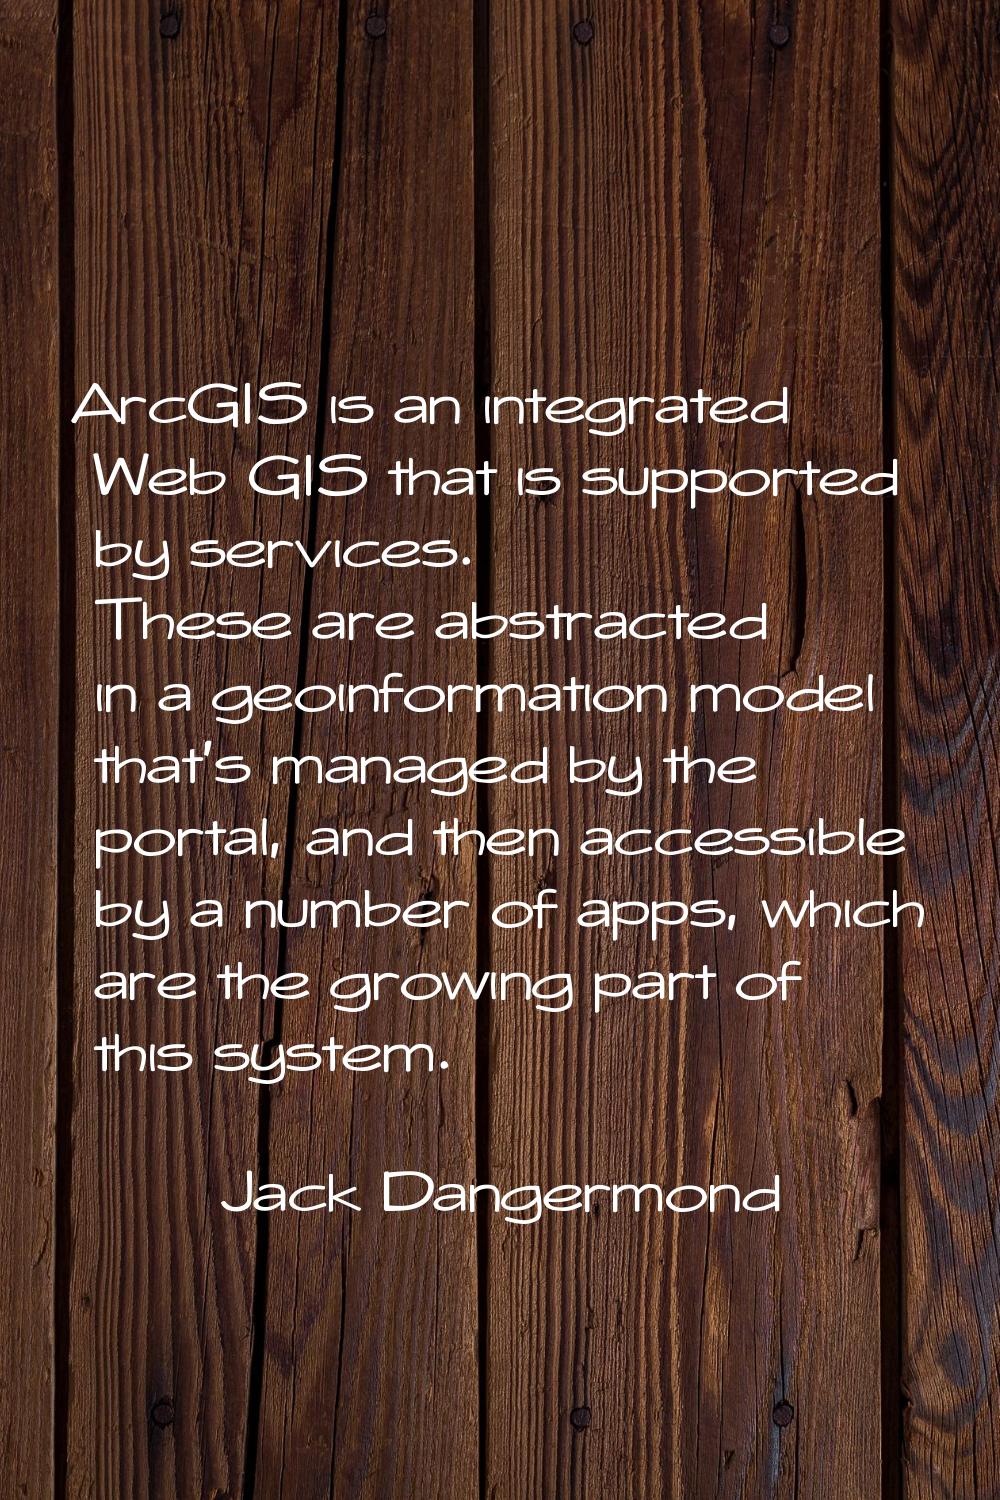 ArcGIS is an integrated Web GIS that is supported by services. These are abstracted in a geoinforma